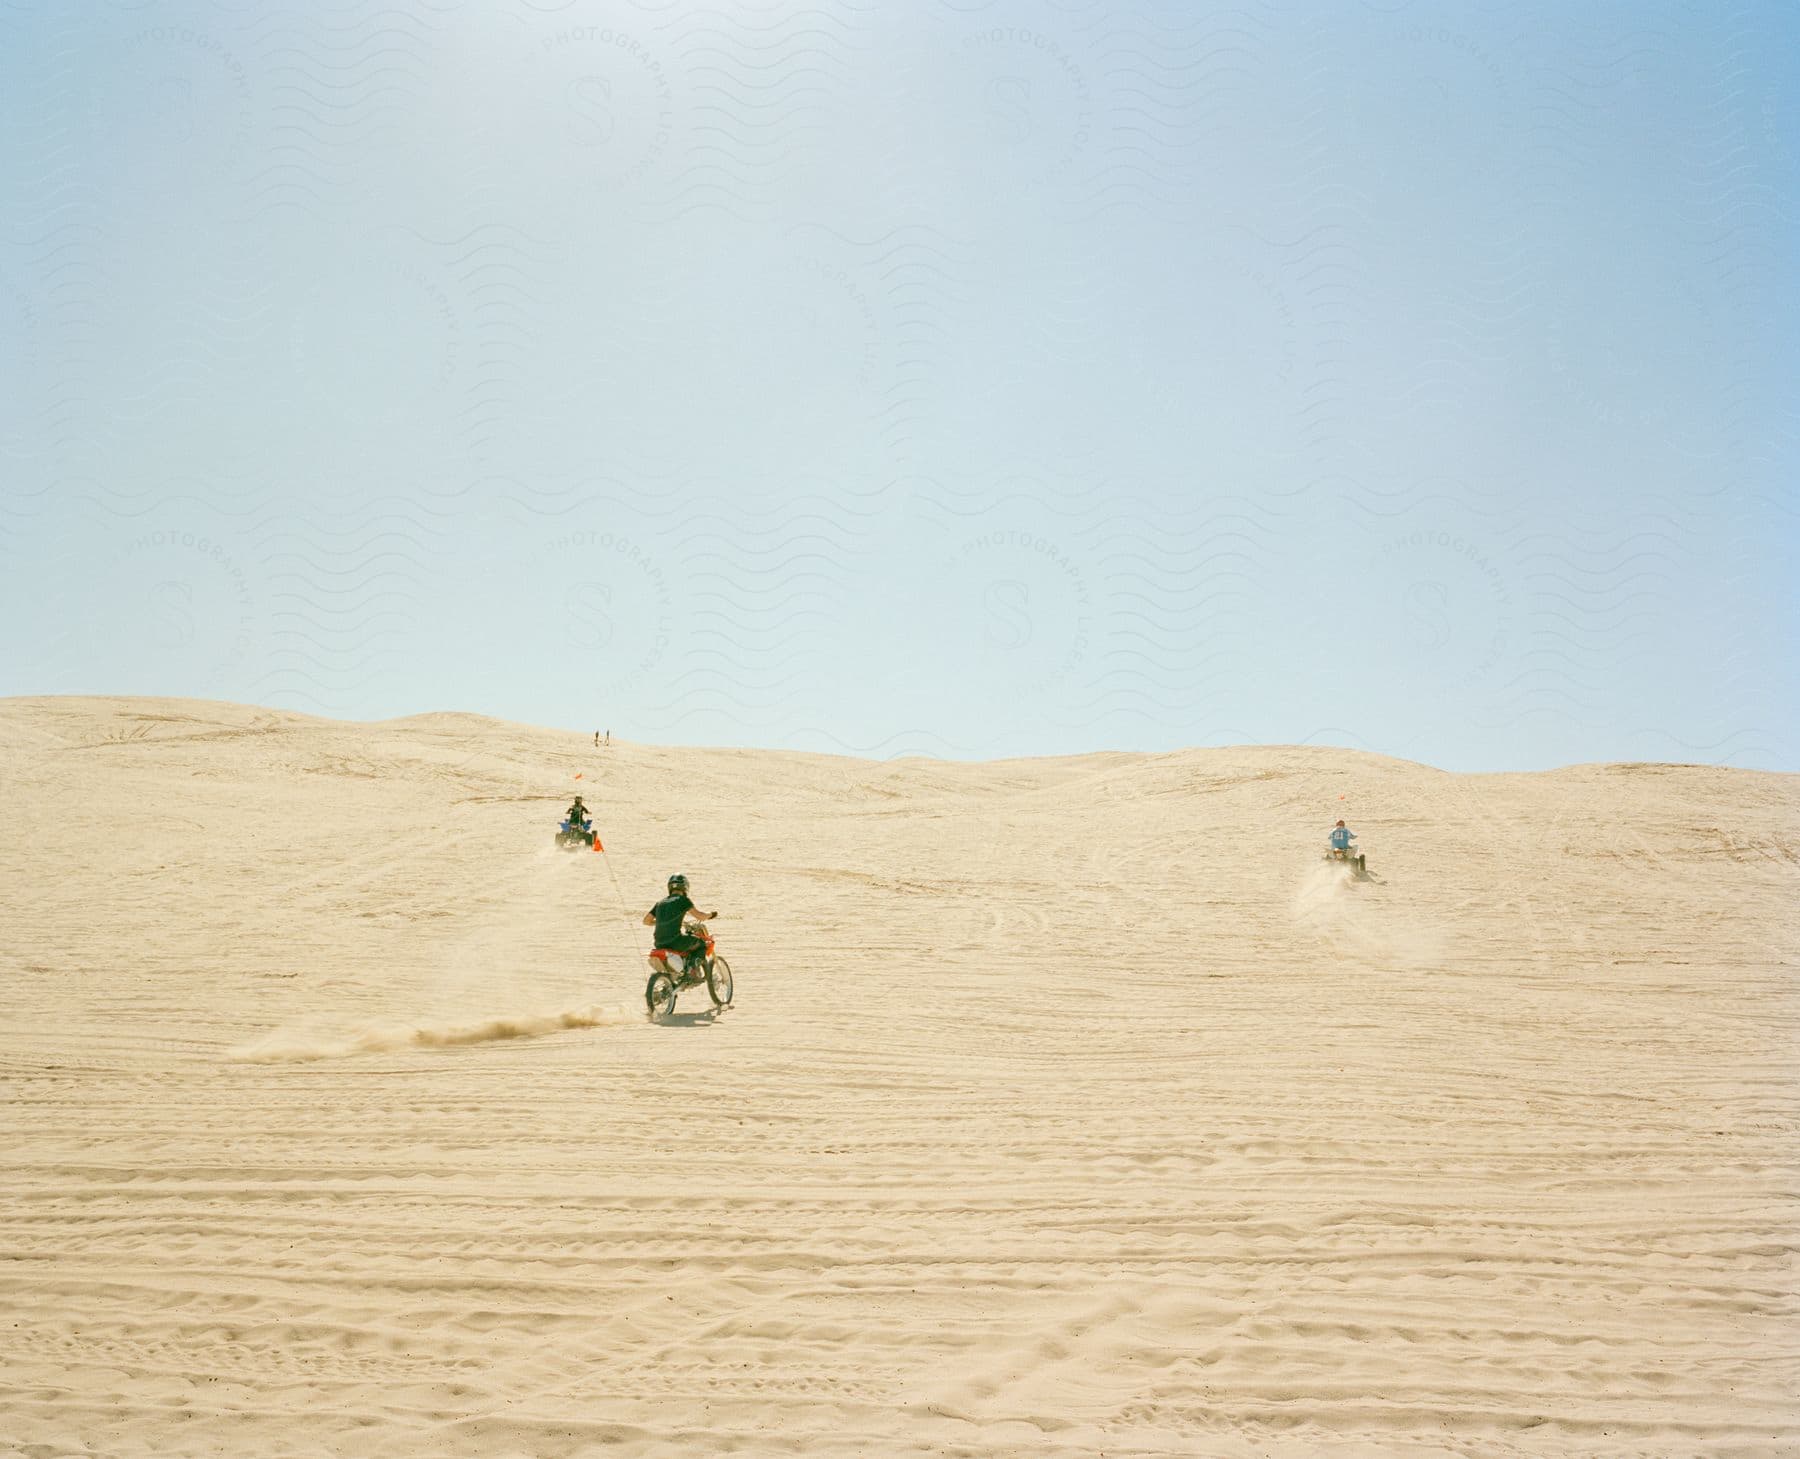 People riding motor vehicles in a sandy landscape